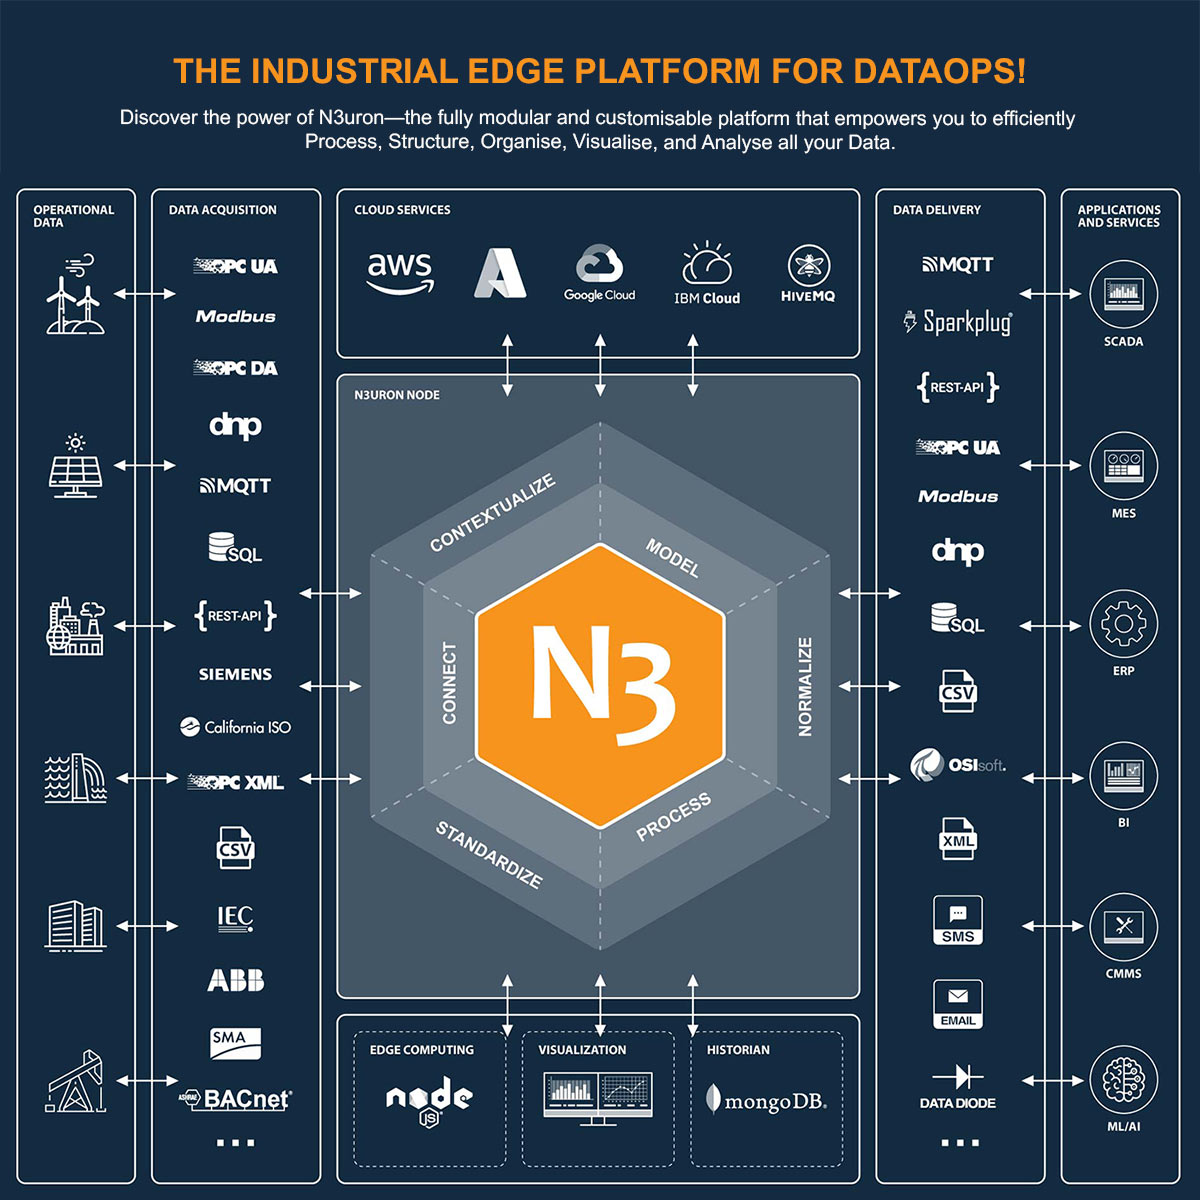 🙌 Introducing N3uron: The Industrial Edge Platform for DataOps! It runs on Linux, Windows, and ARM Systems. It comes with Unlimited Tags, Connections, Clients, Designers. Head over to our website to learn more👇:bit.ly/3oHgDFZ

#IIoT #Industry40 #industrialiot #N3uron